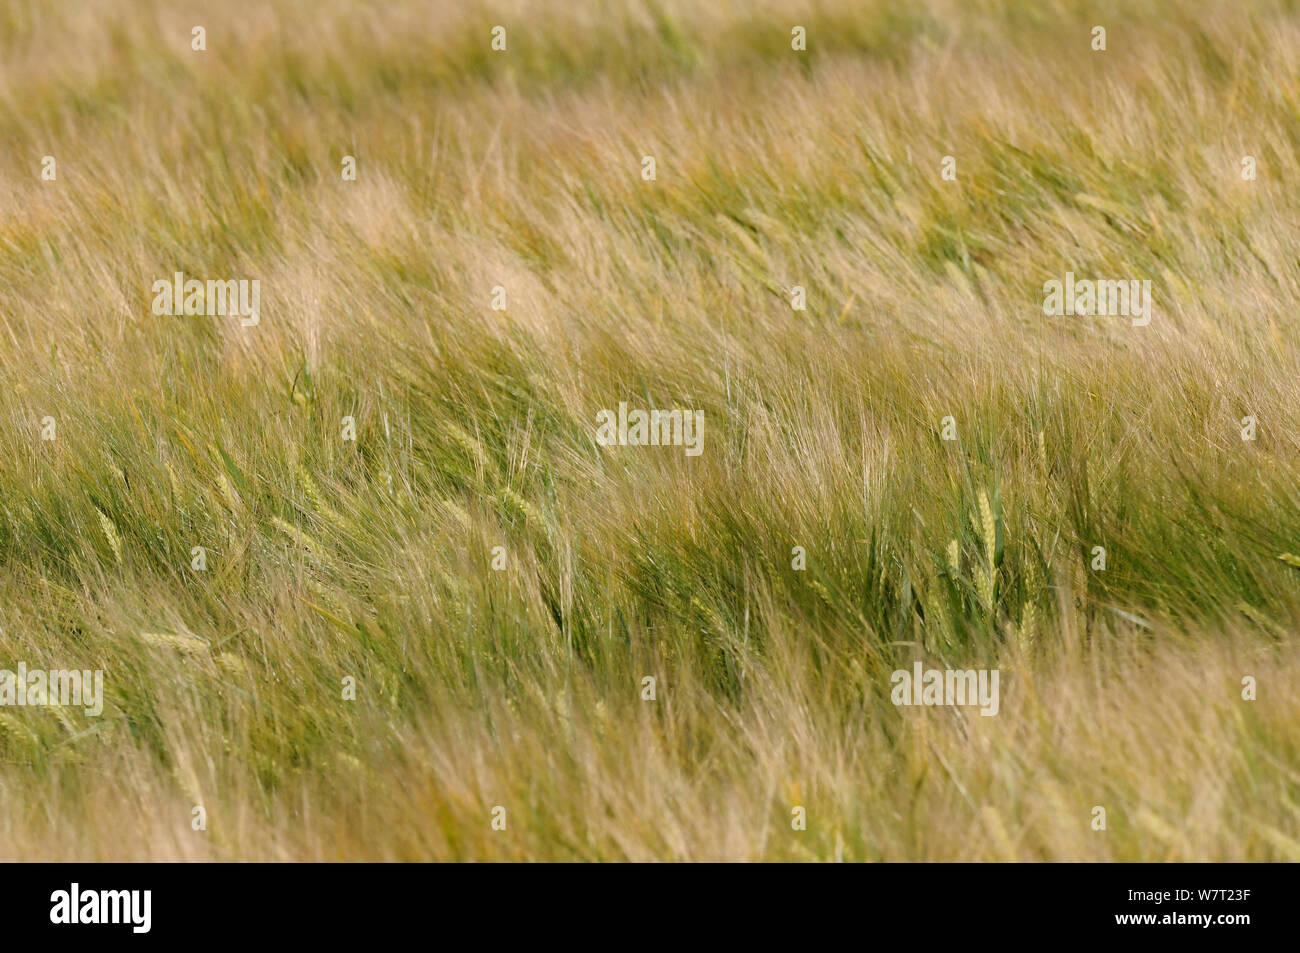 Ripening Barley (Hordeum vulgare) crop rippled by gusts of wind, Wiltshire, UK, July. Stock Photo